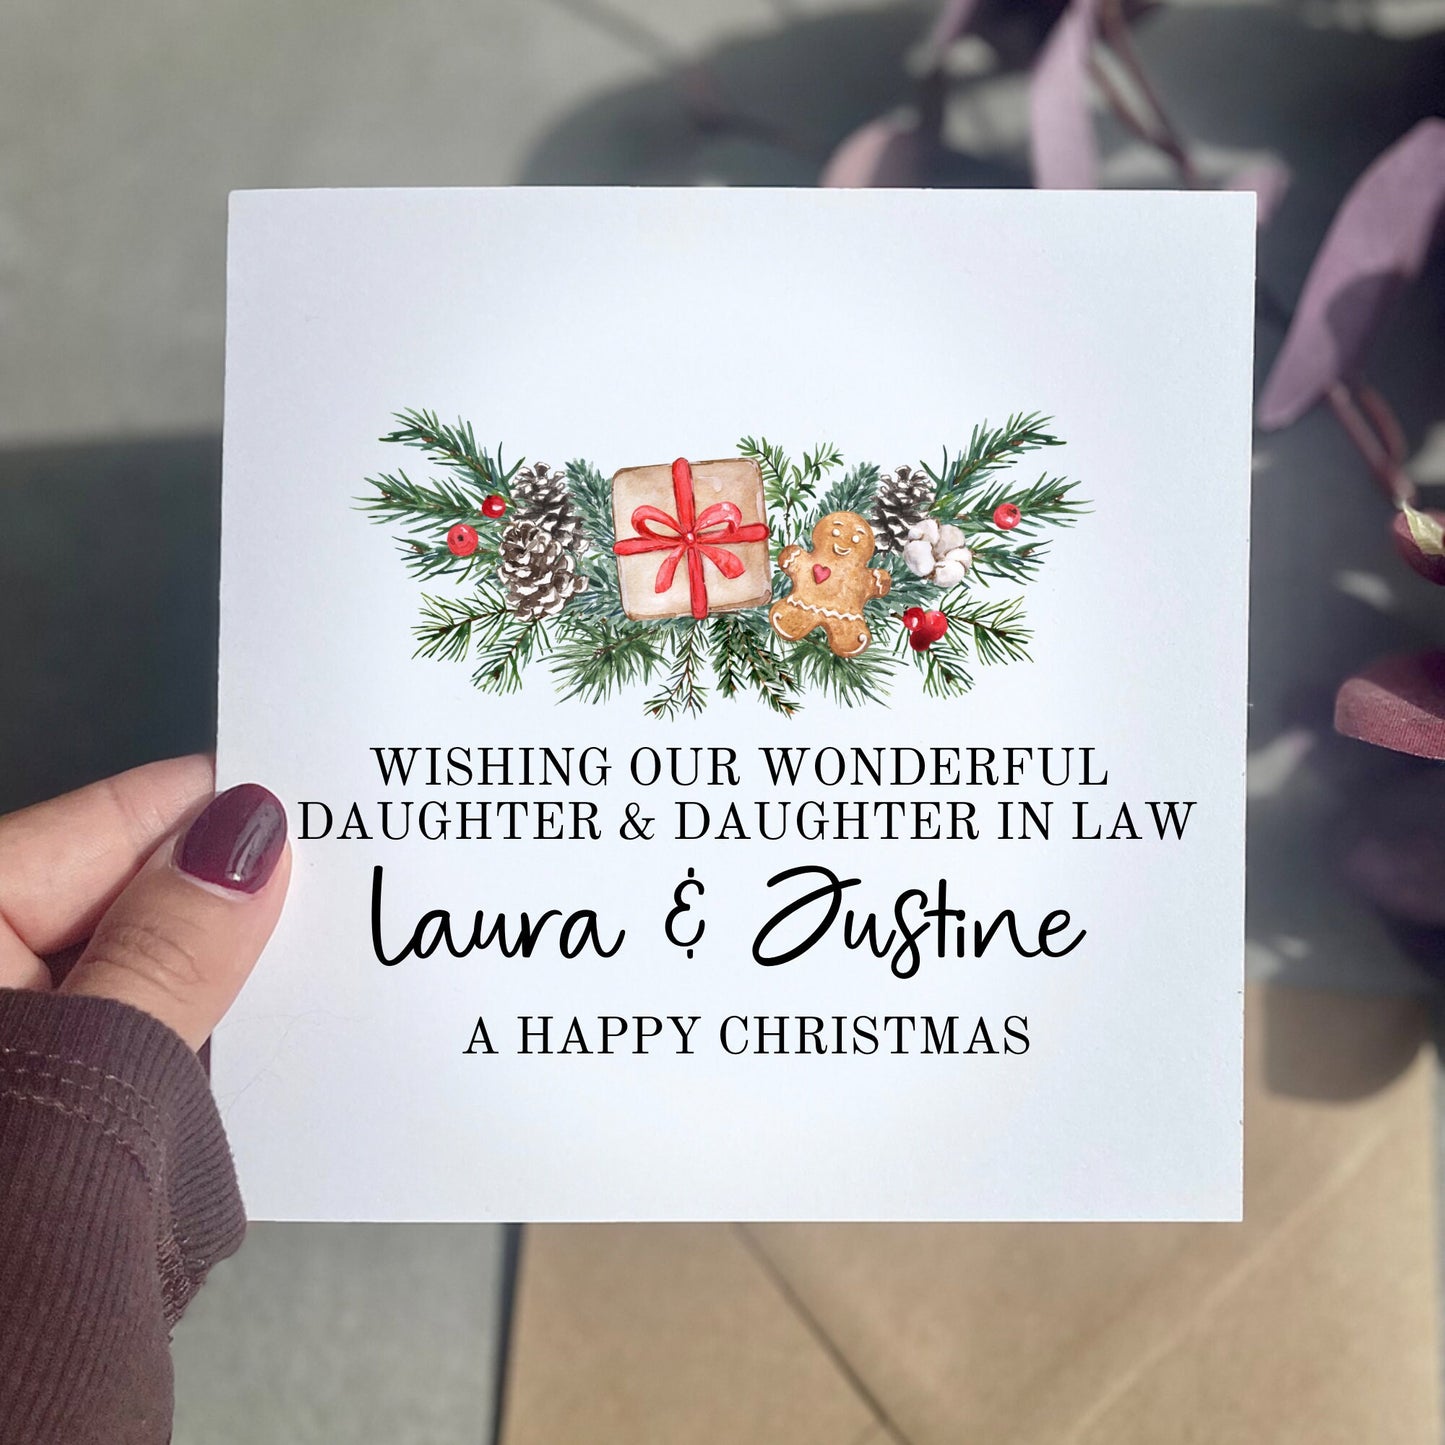 Daughter & Daughter in law Christmas card, personalised Christmas card for daughter and her wife, LGBTQ Christmas cards